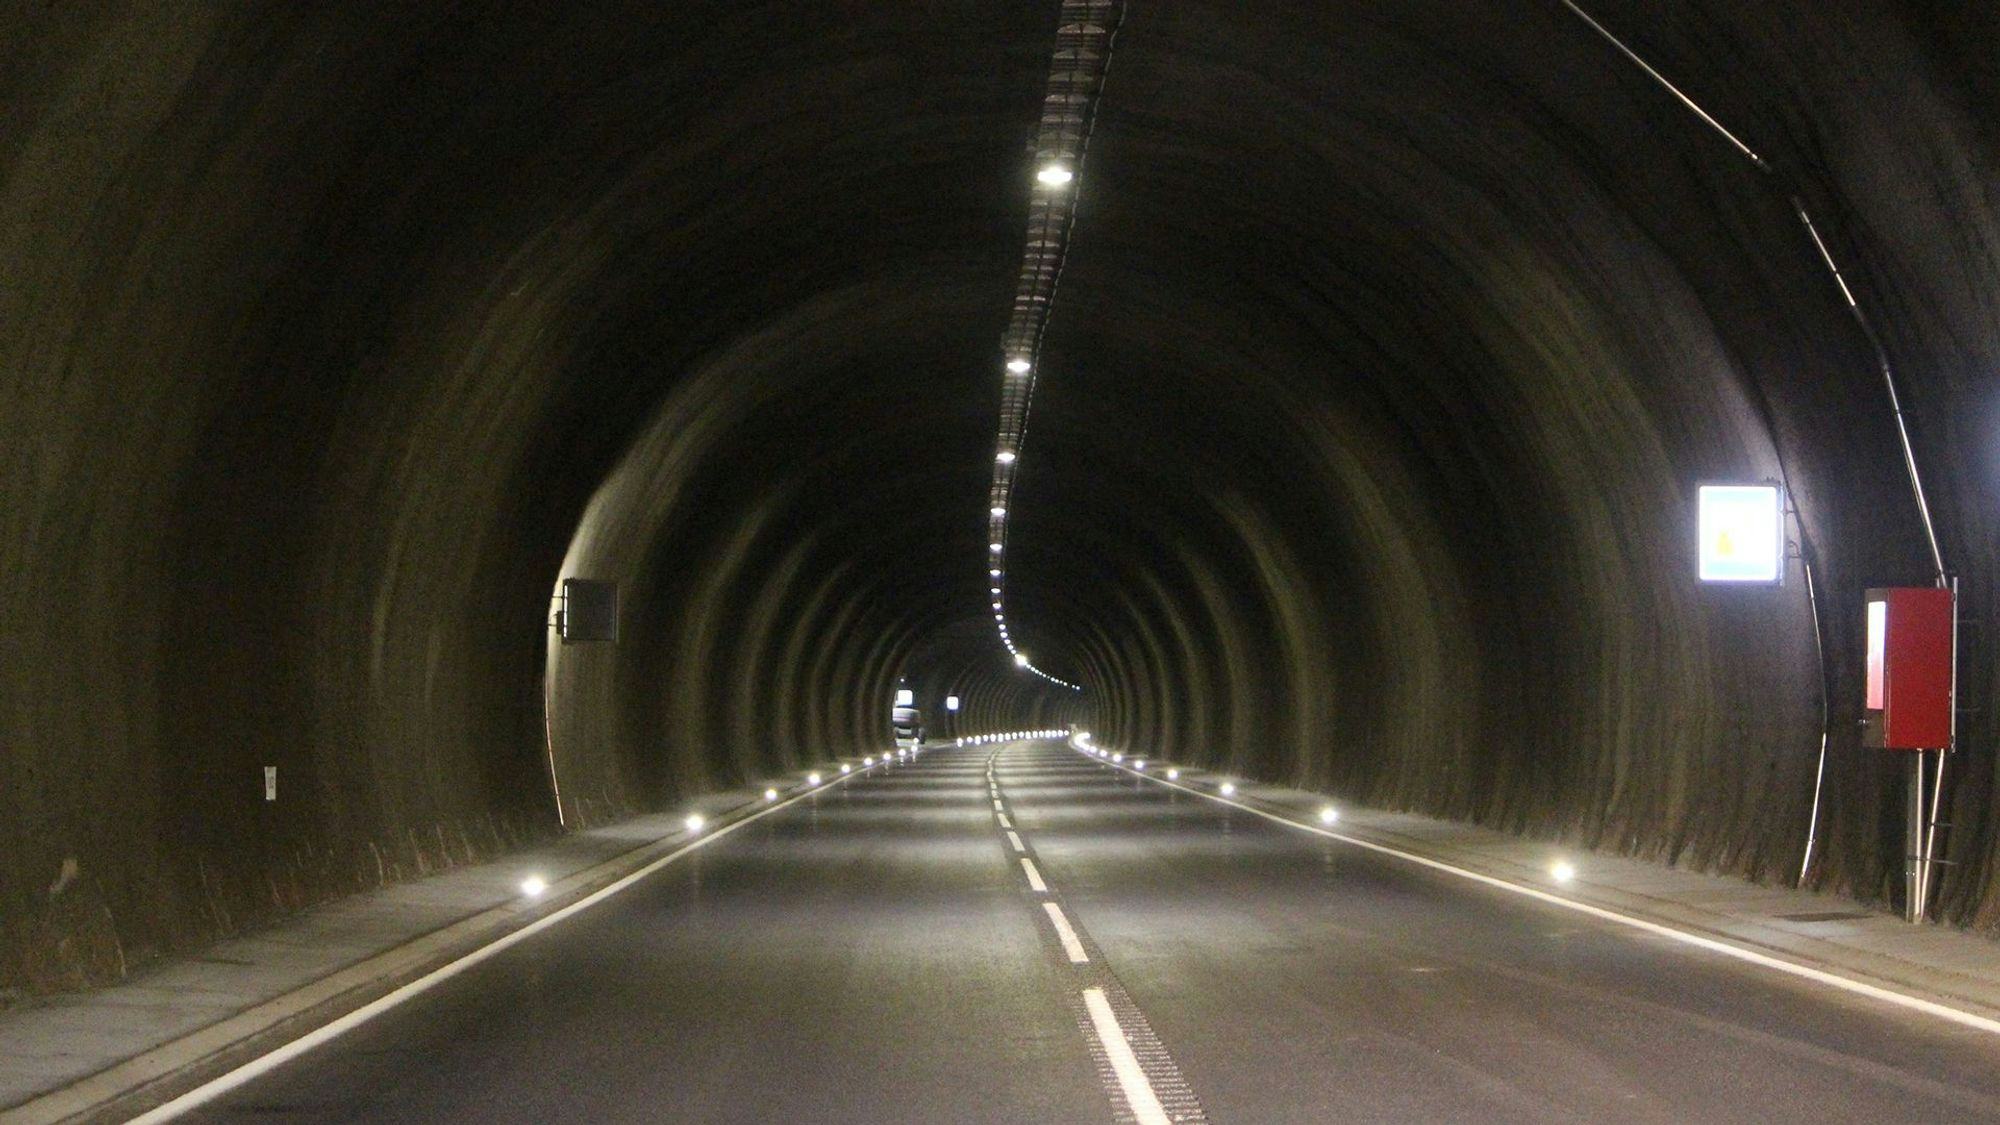 Interior of a tunnel with a well lit roadway